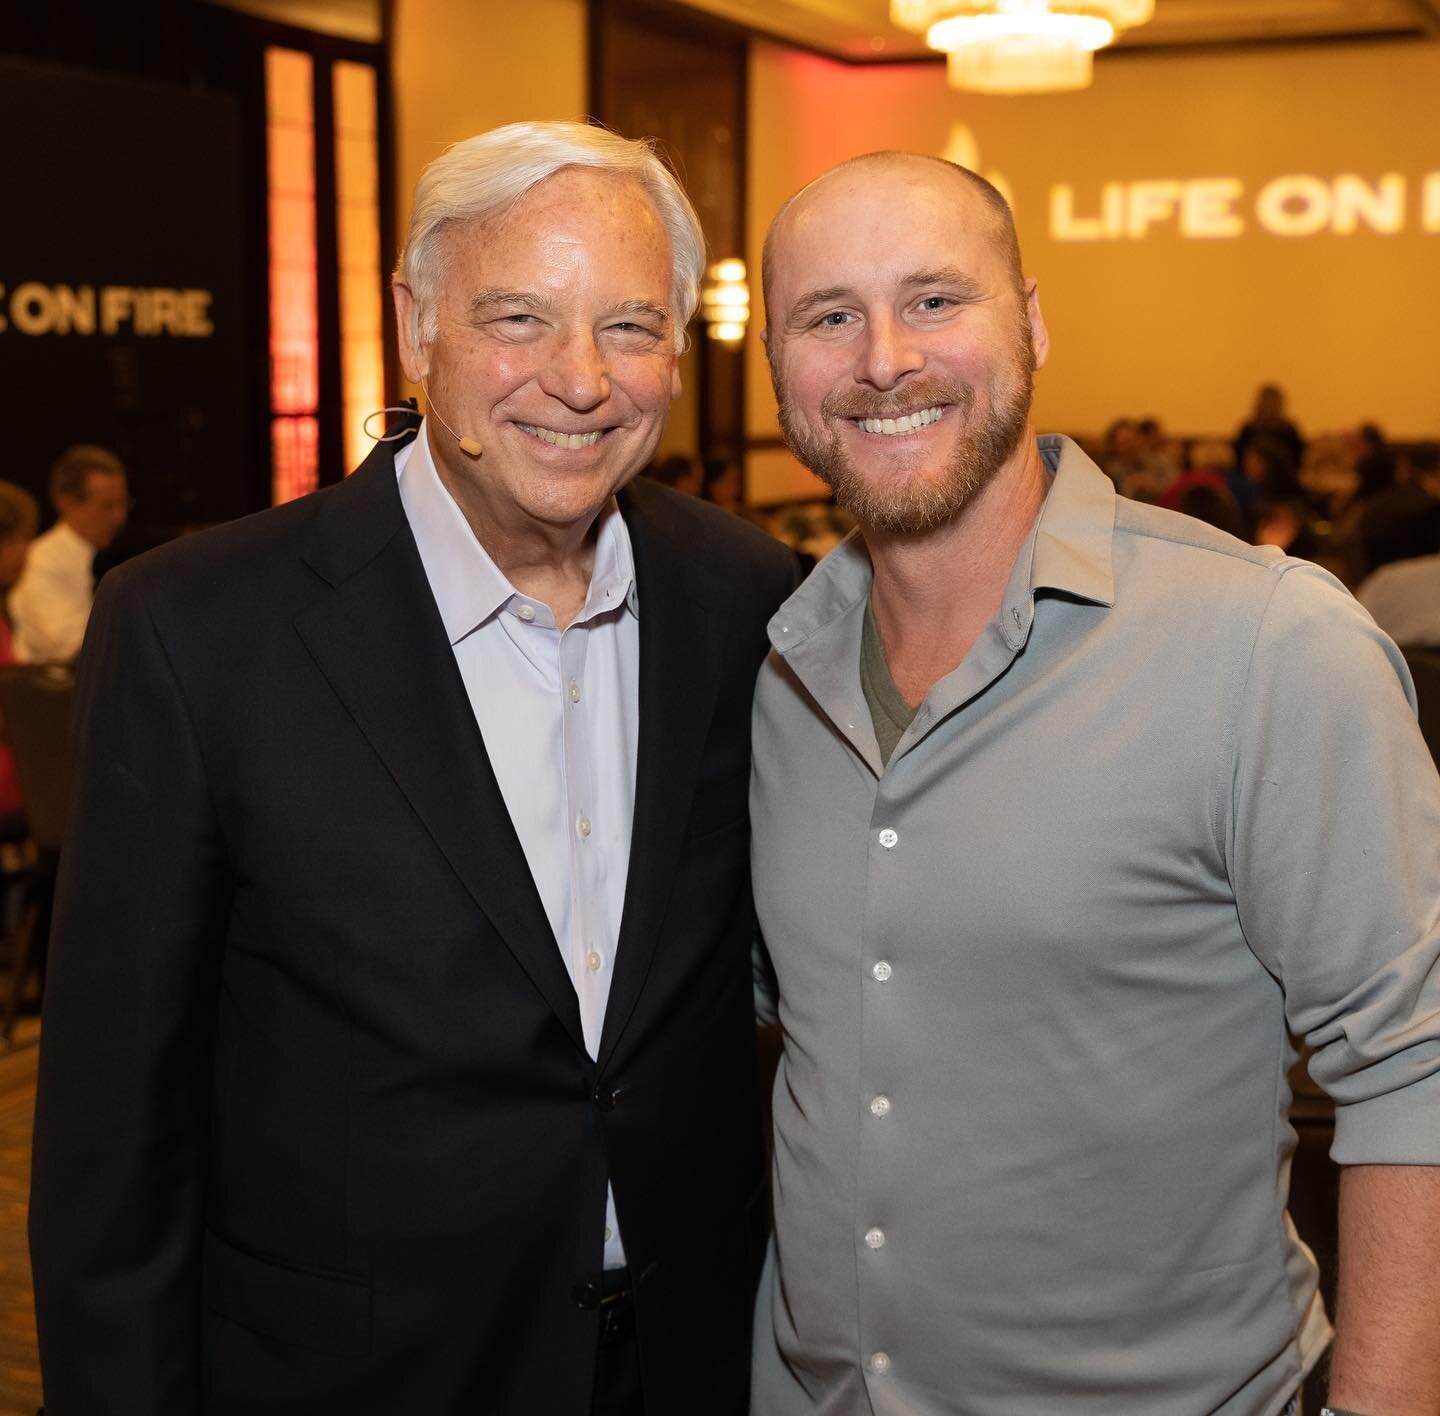 When you meet one of your favorite authors then get to have dinner with him. @jackcanfield_official is as authentic and real as they come. His #chickensoupforthesoul series has sold millions of copies and helped untold amounts of people in so many wa